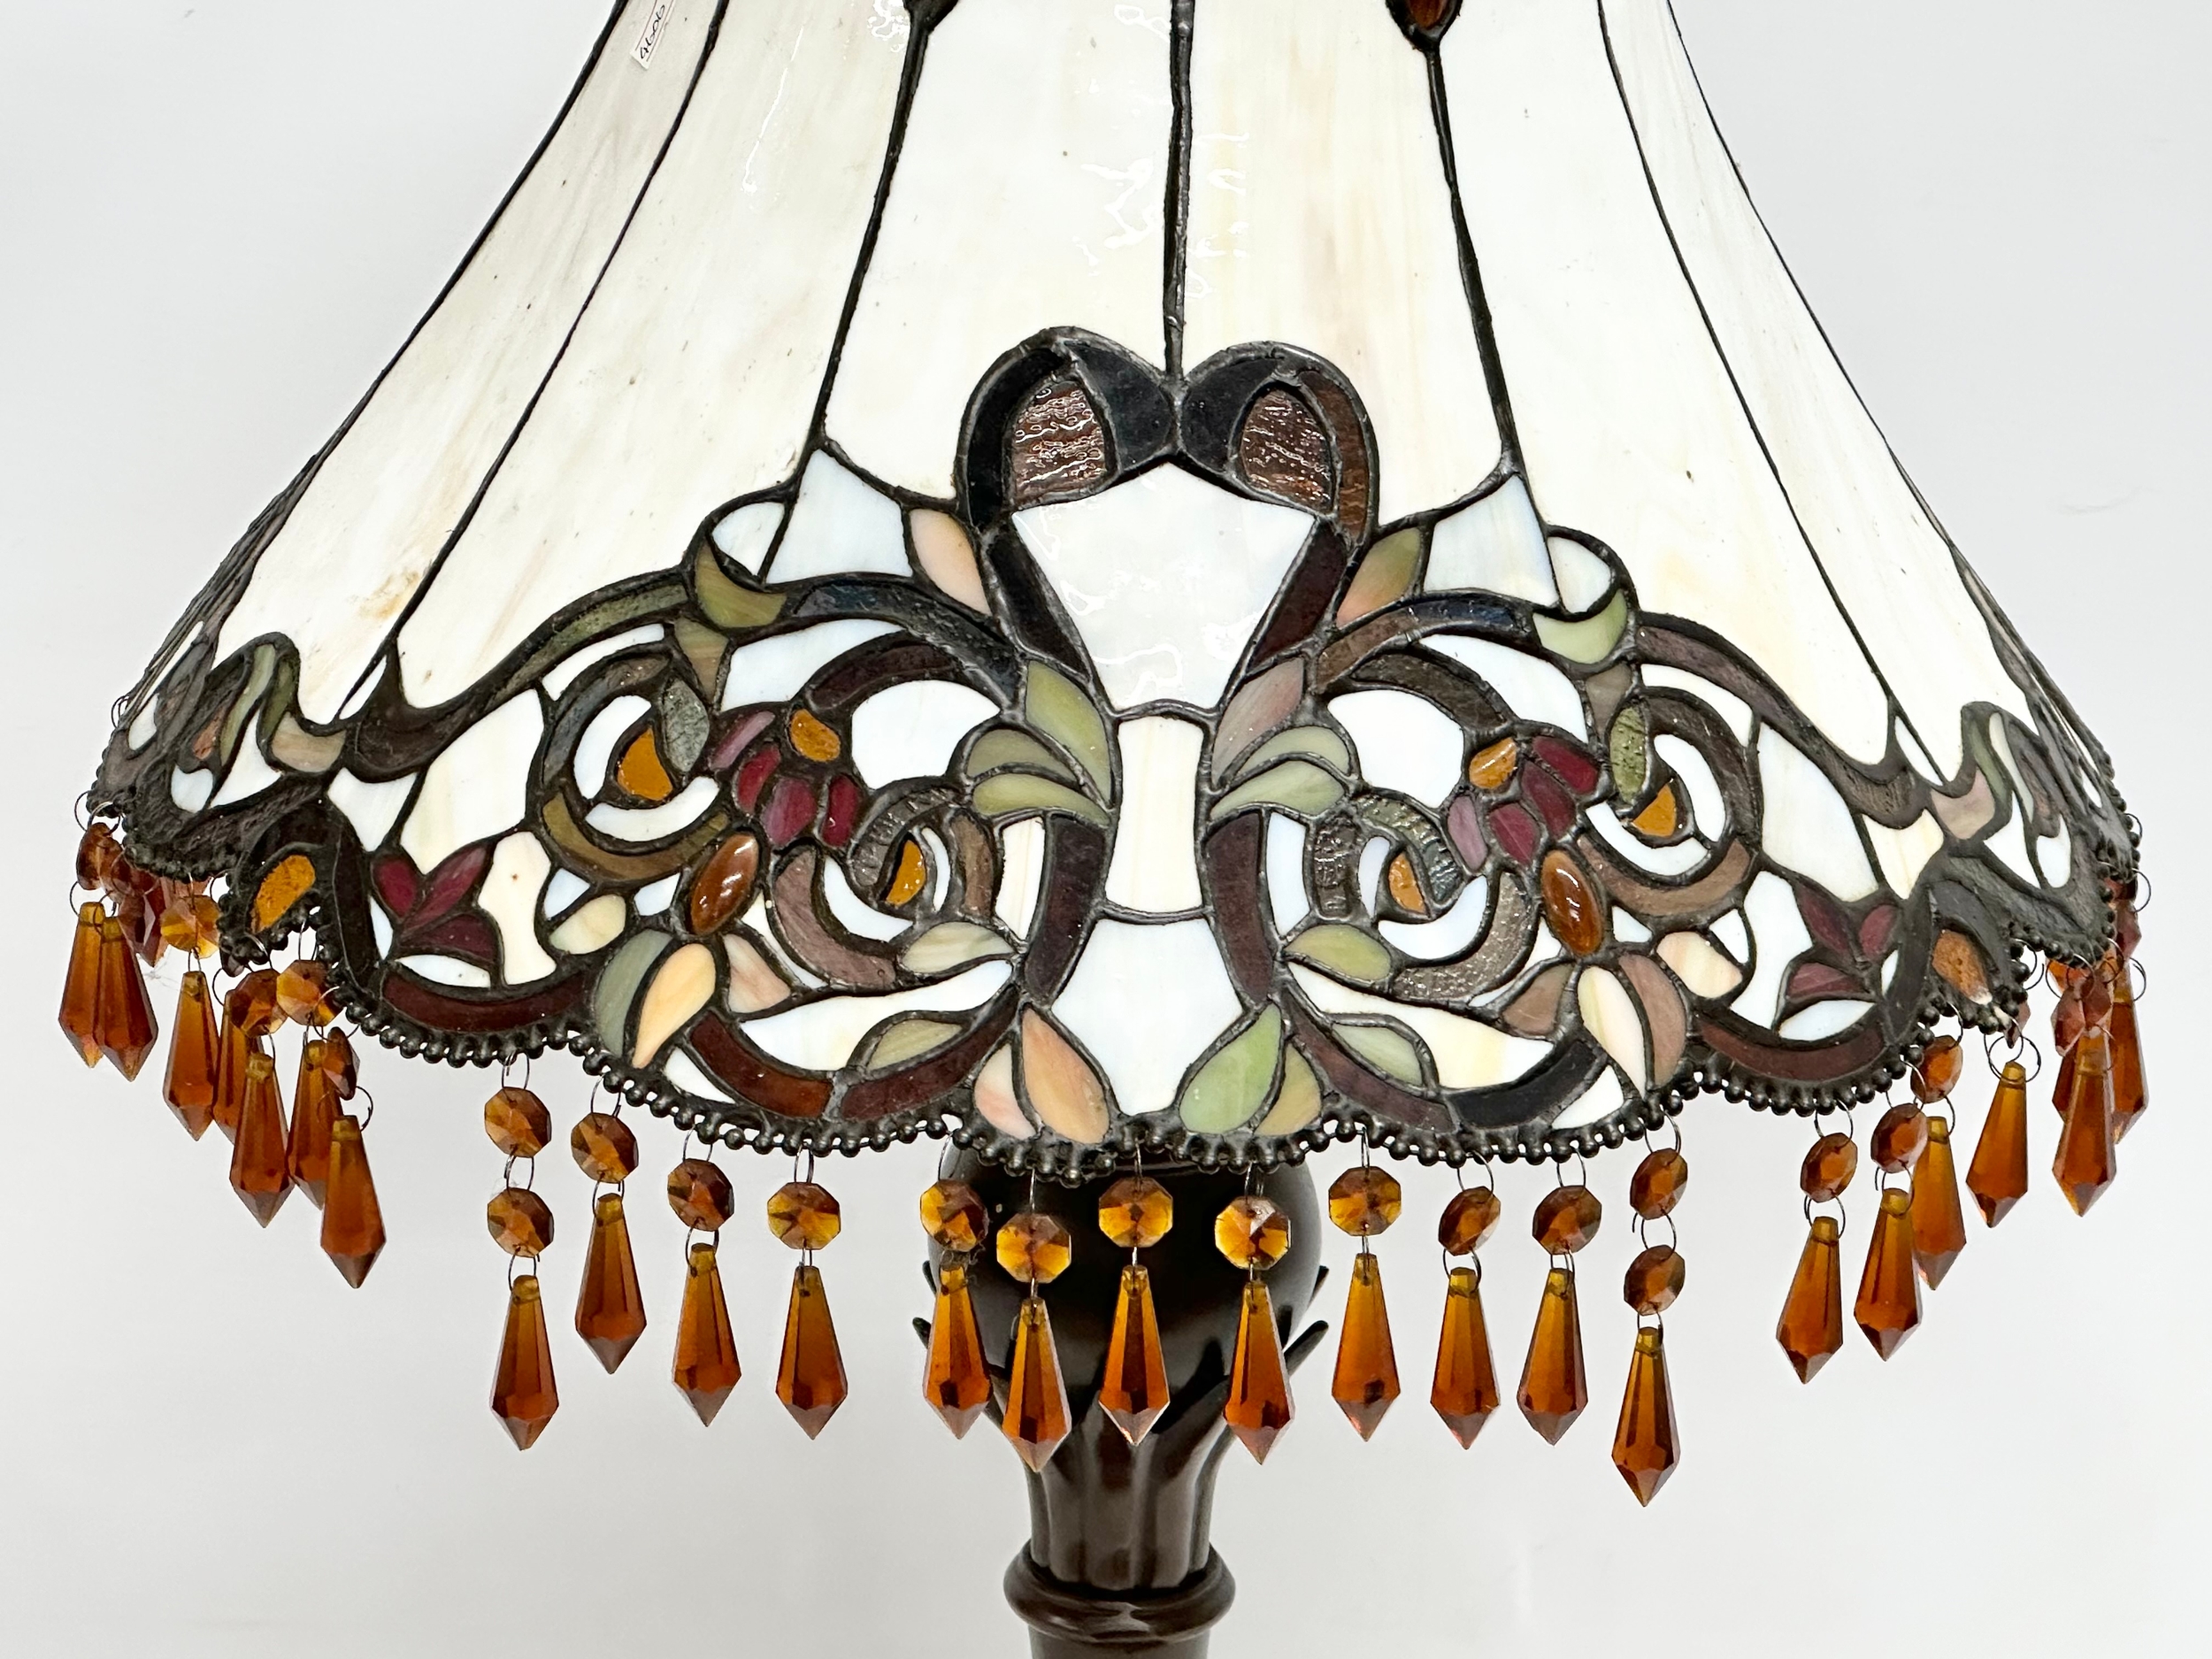 A large Tiffany style table lamp with amber glass droplets. 44x70cm - Image 2 of 5